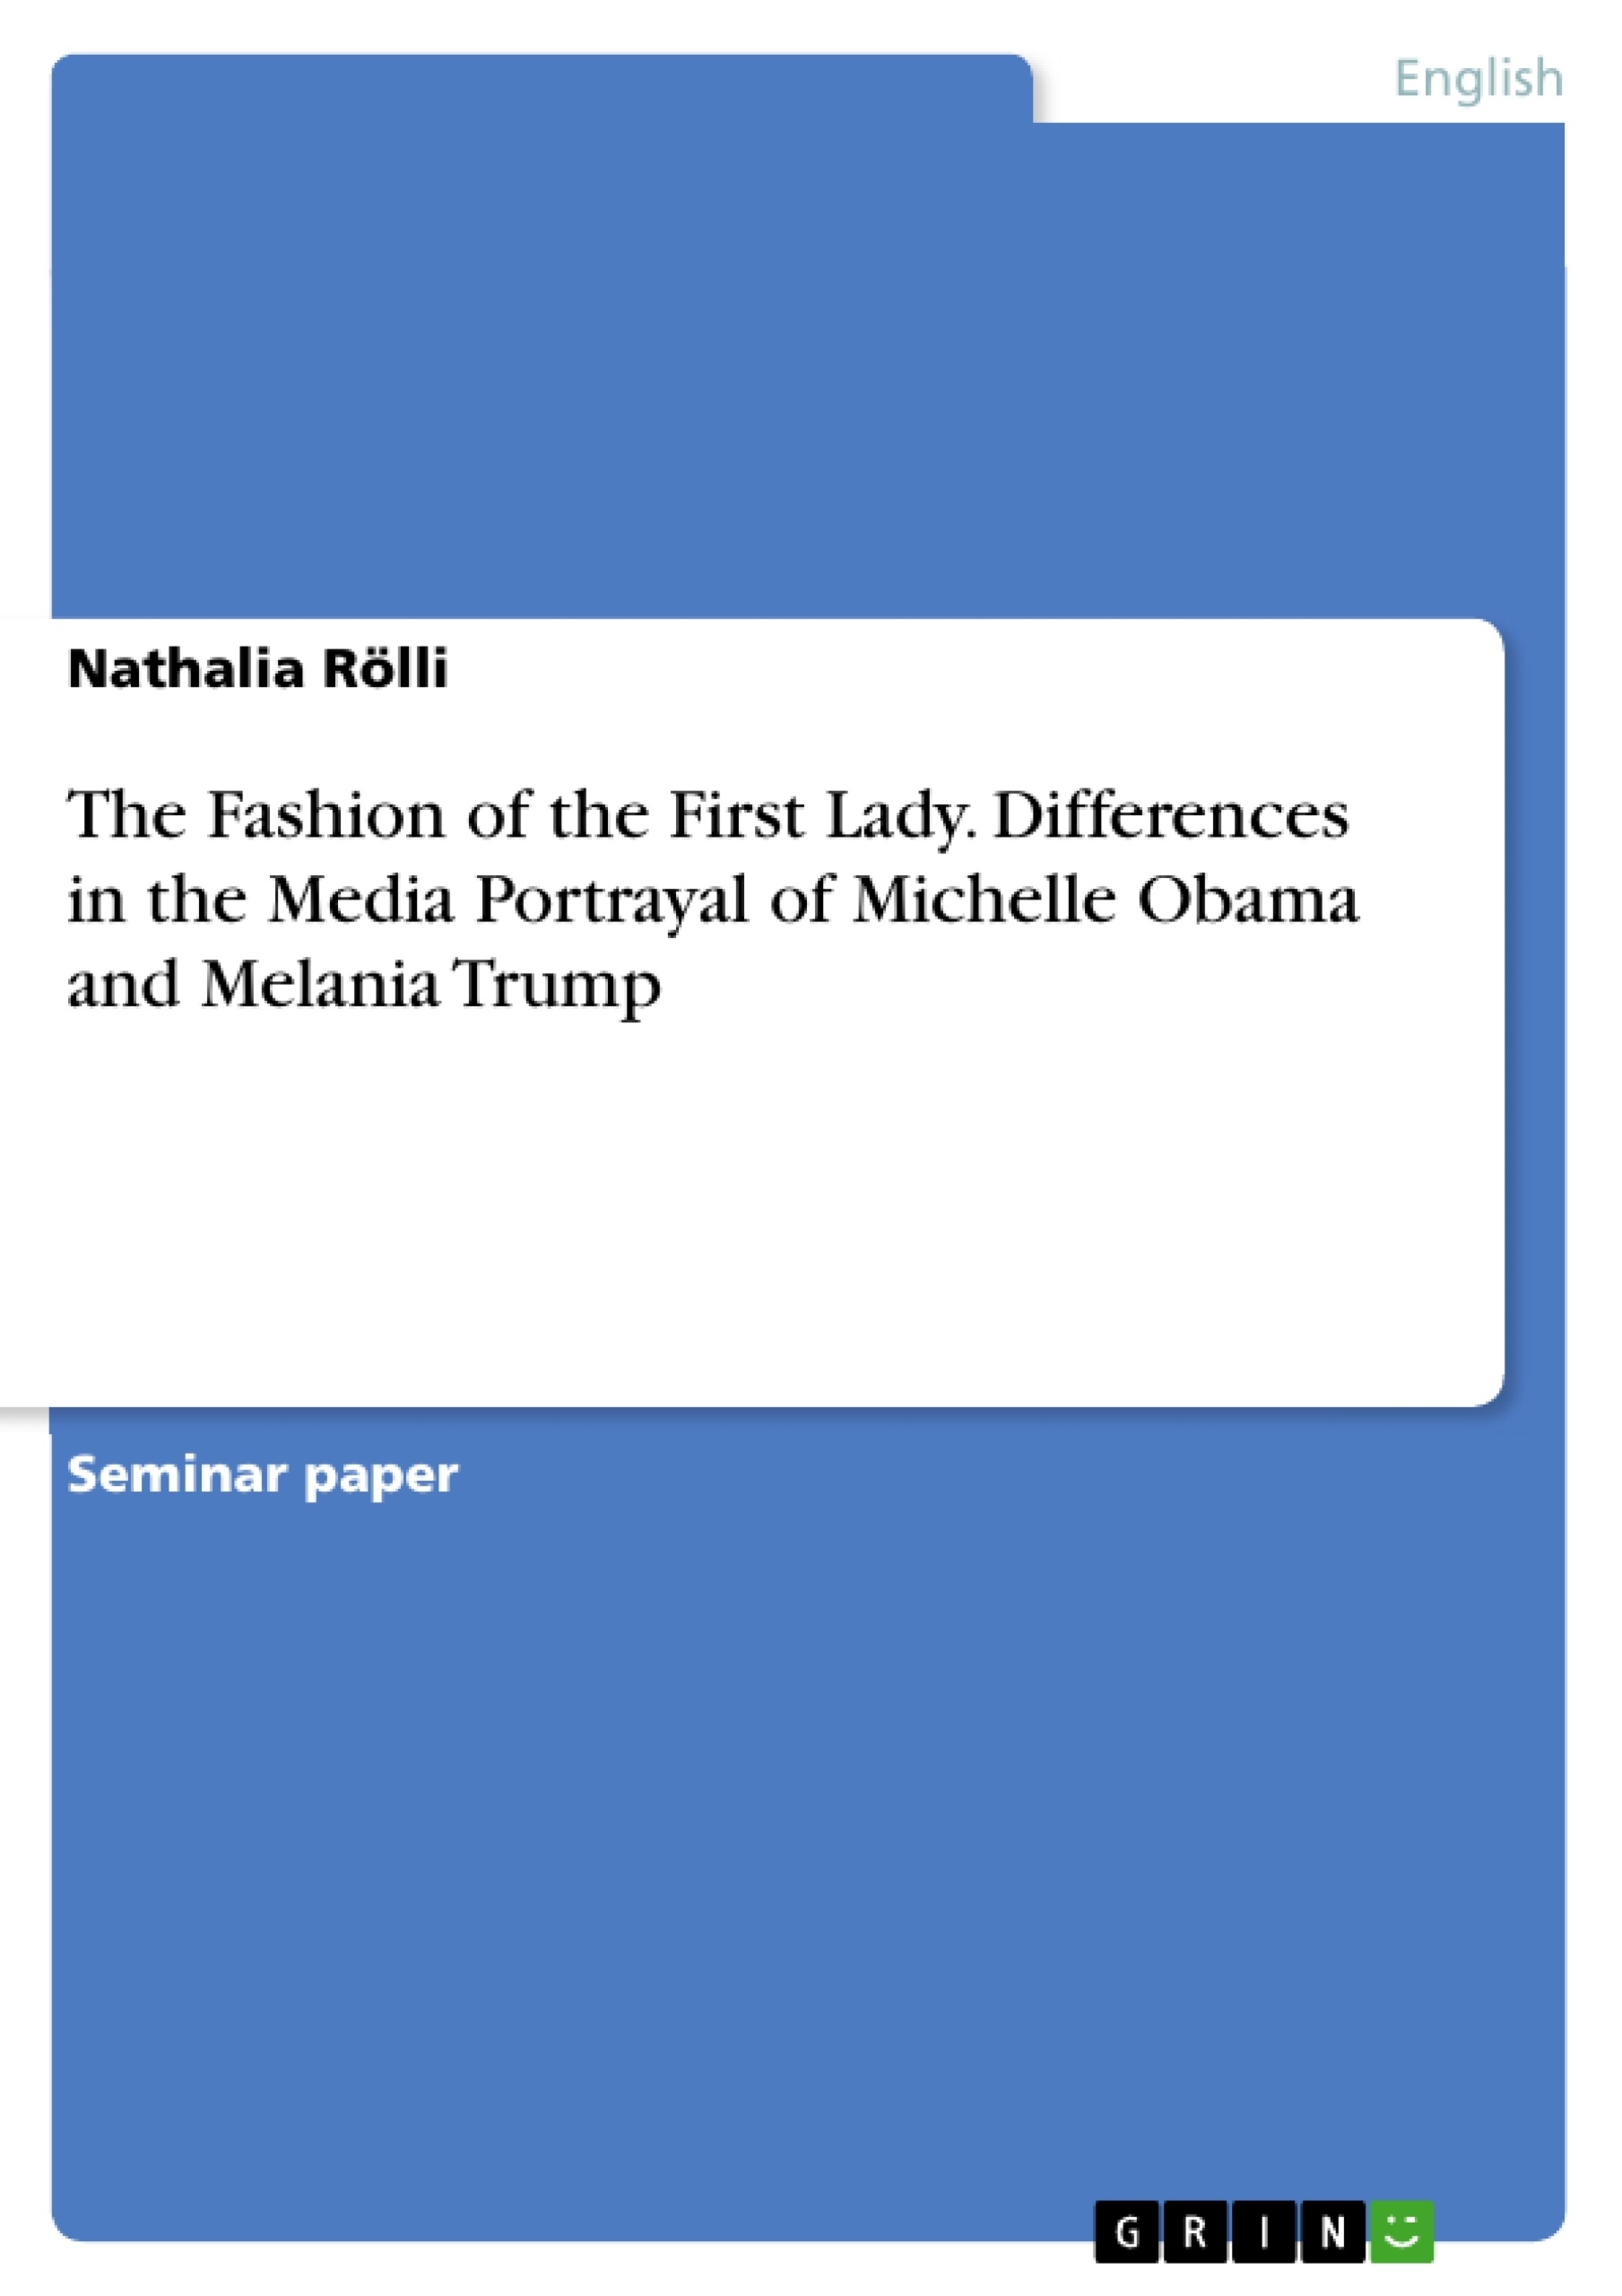 Title: The Fashion of the First Lady. Differences in the Media Portrayal of Michelle Obama and Melania Trump